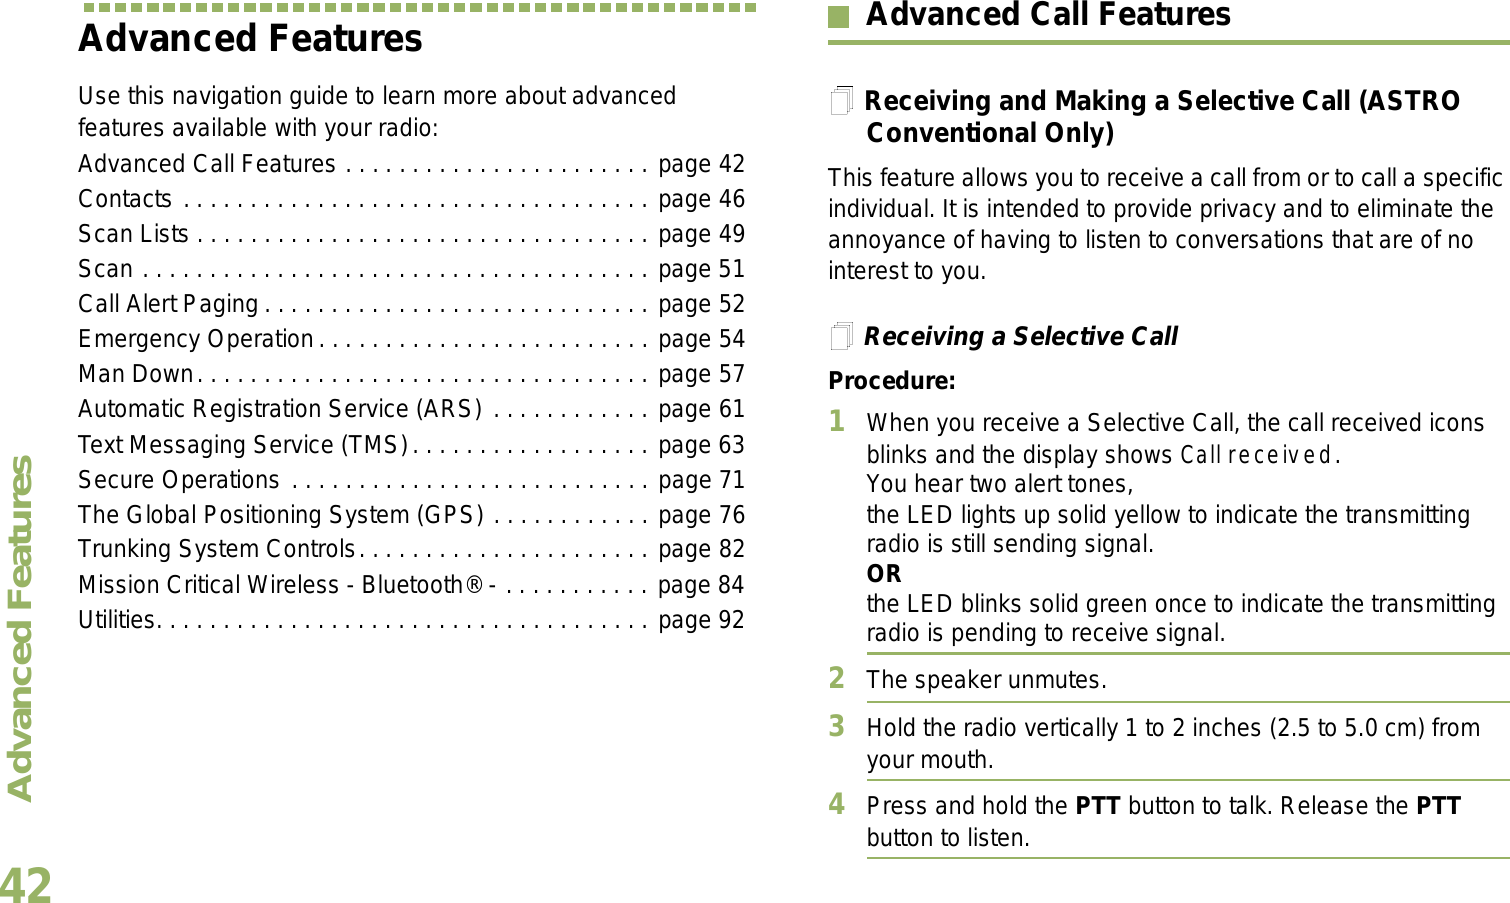 Advanced FeaturesEnglish42Advanced FeaturesUse this navigation guide to learn more about advanced features available with your radio:Advanced Call Features . . . . . . . . . . . . . . . . . . . . . . . page 42Contacts . . . . . . . . . . . . . . . . . . . . . . . . . . . . . . . . . . . page 46Scan Lists . . . . . . . . . . . . . . . . . . . . . . . . . . . . . . . . . . page 49Scan . . . . . . . . . . . . . . . . . . . . . . . . . . . . . . . . . . . . . . page 51Call Alert Paging . . . . . . . . . . . . . . . . . . . . . . . . . . . . . page 52Emergency Operation. . . . . . . . . . . . . . . . . . . . . . . . . page 54Man Down. . . . . . . . . . . . . . . . . . . . . . . . . . . . . . . . . . page 57Automatic Registration Service (ARS) . . . . . . . . . . . . page 61Text Messaging Service (TMS). . . . . . . . . . . . . . . . . . page 63Secure Operations . . . . . . . . . . . . . . . . . . . . . . . . . . . page 71The Global Positioning System (GPS) . . . . . . . . . . . . page 76Trunking System Controls. . . . . . . . . . . . . . . . . . . . . . page 82Mission Critical Wireless - Bluetooth® - . . . . . . . . . . . page 84Utilities. . . . . . . . . . . . . . . . . . . . . . . . . . . . . . . . . . . . . page 92Advanced Call FeaturesReceiving and Making a Selective Call (ASTRO Conventional Only)This feature allows you to receive a call from or to call a specific individual. It is intended to provide privacy and to eliminate the annoyance of having to listen to conversations that are of no interest to you.Receiving a Selective CallProcedure:1When you receive a Selective Call, the call received icons blinks and the display shows Call received. You hear two alert tones,the LED lights up solid yellow to indicate the transmitting radio is still sending signal.ORthe LED blinks solid green once to indicate the transmitting radio is pending to receive signal. 2The speaker unmutes.3Hold the radio vertically 1 to 2 inches (2.5 to 5.0 cm) from your mouth.4Press and hold the PTT button to talk. Release the PTT button to listen.